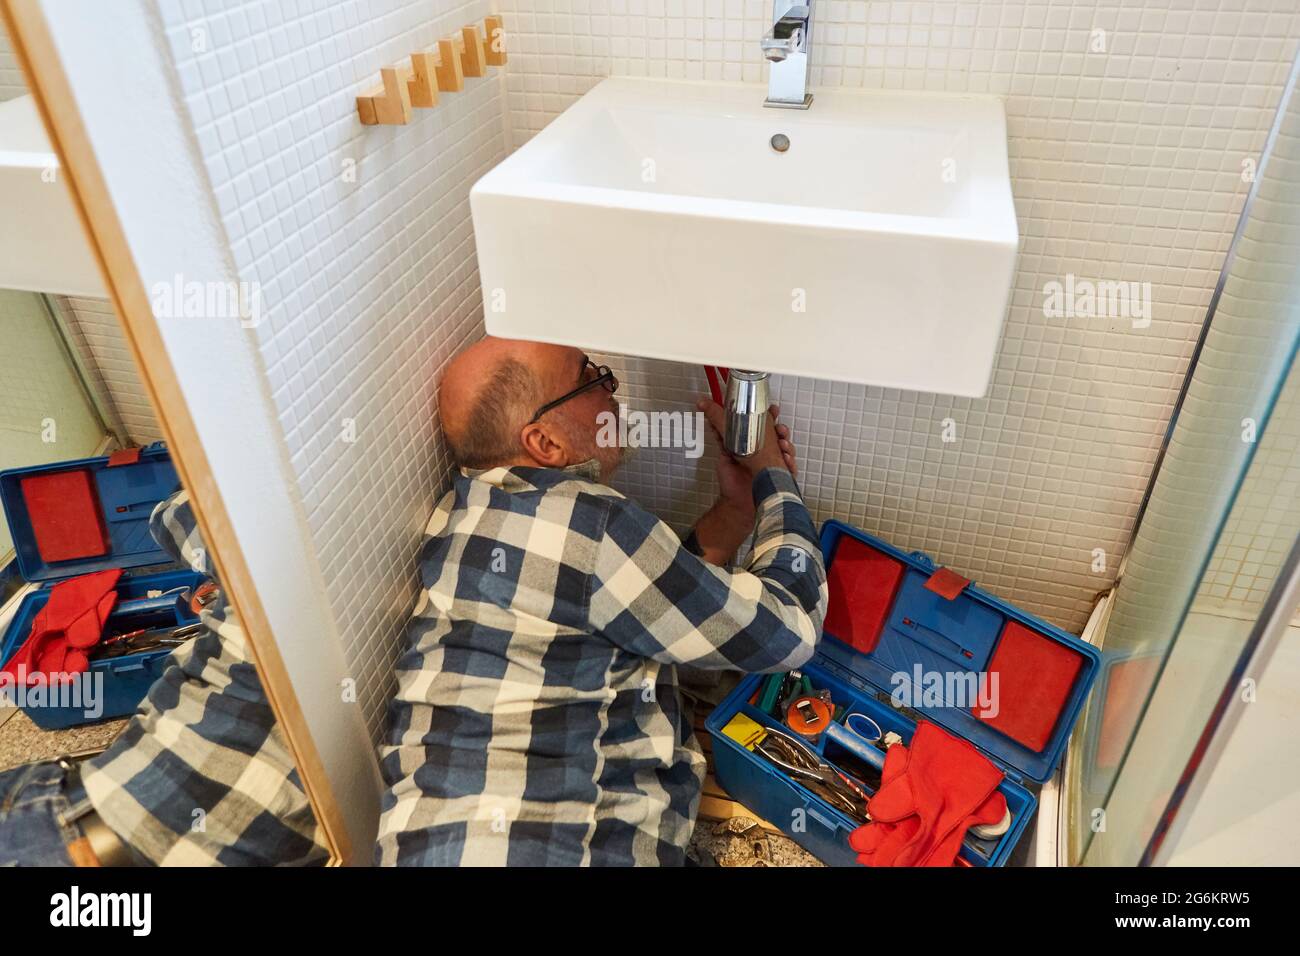 Plumber or do-it-yourselfer installs or assembles new wash basin in the bathroom Stock Photo